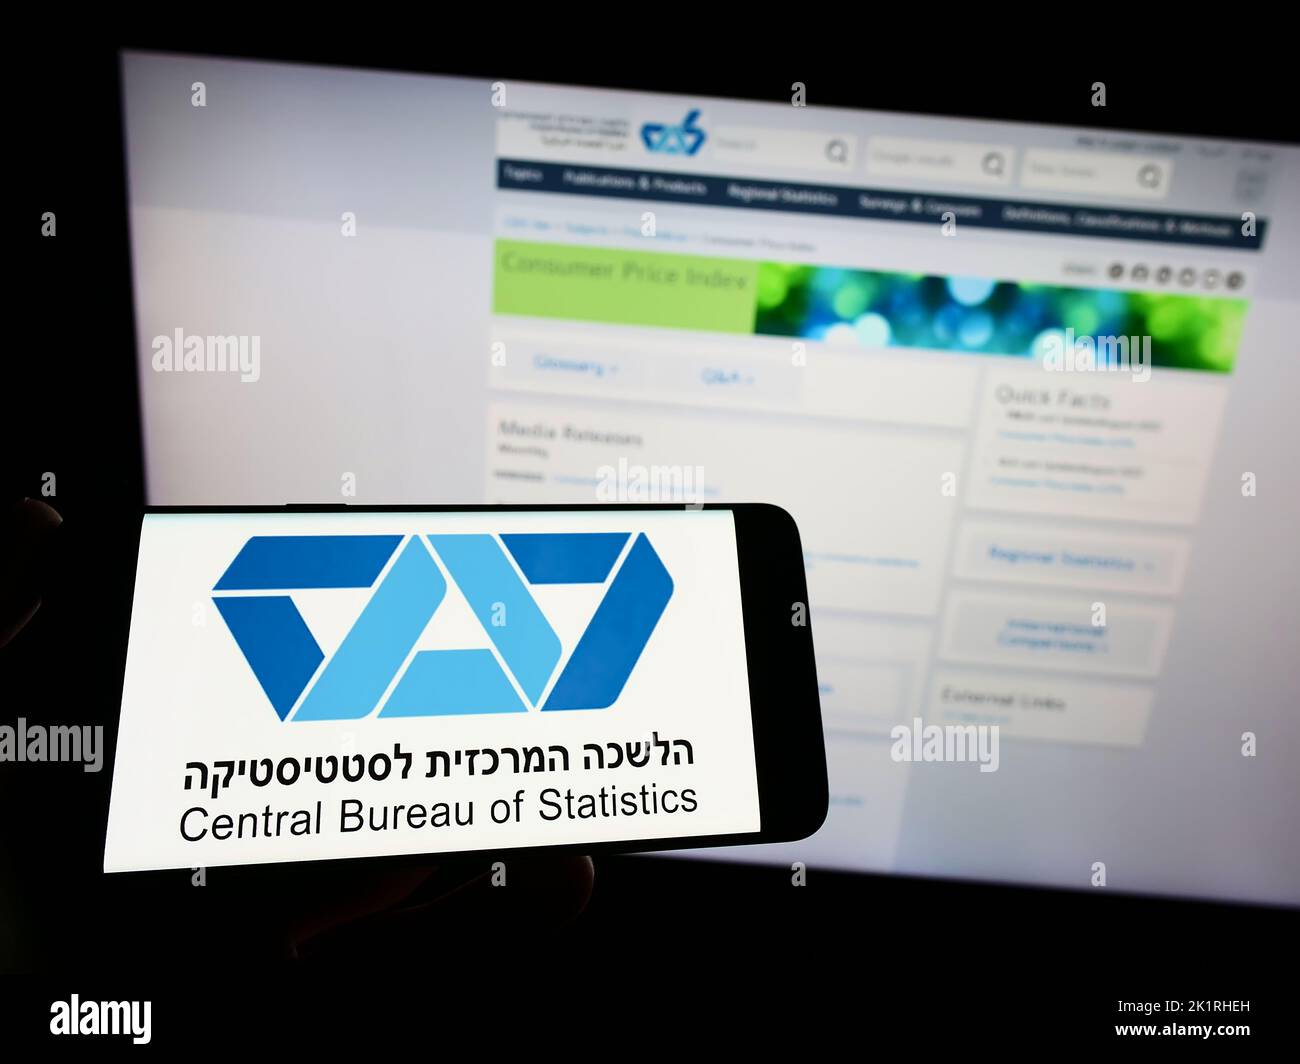 Person holding smartphone with logo of Israel Central Bureau of Statistics (CBS) on screen in front of website. Focus on phone display. Stock Photo